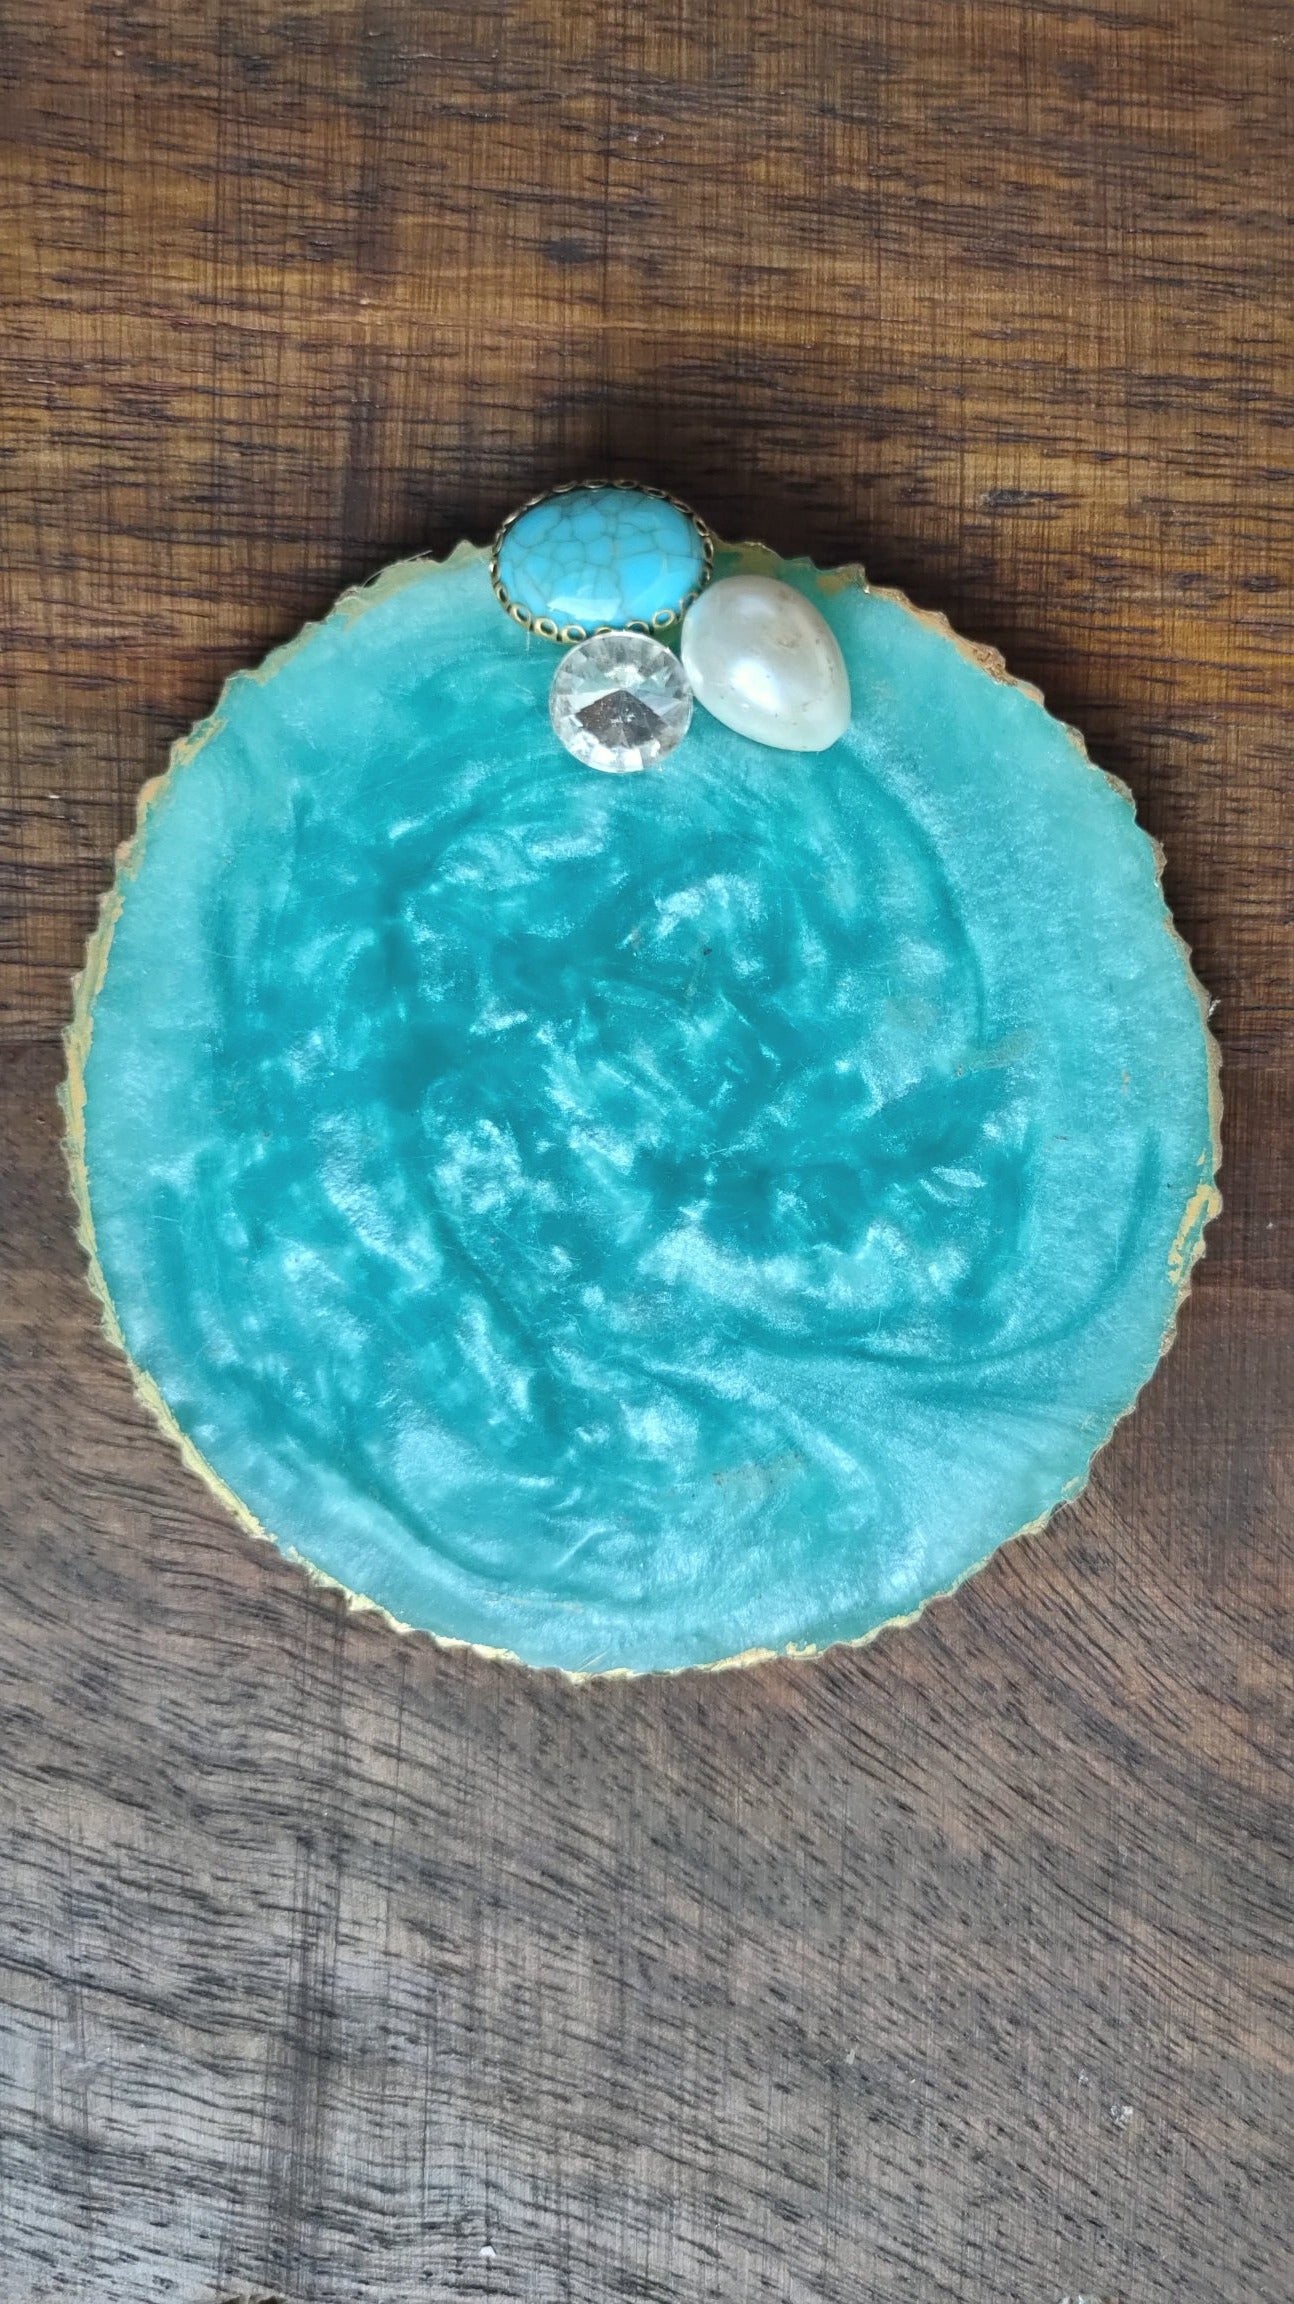 Sky Blue Coasters with Gold Detailing and Stones (Set of 6)